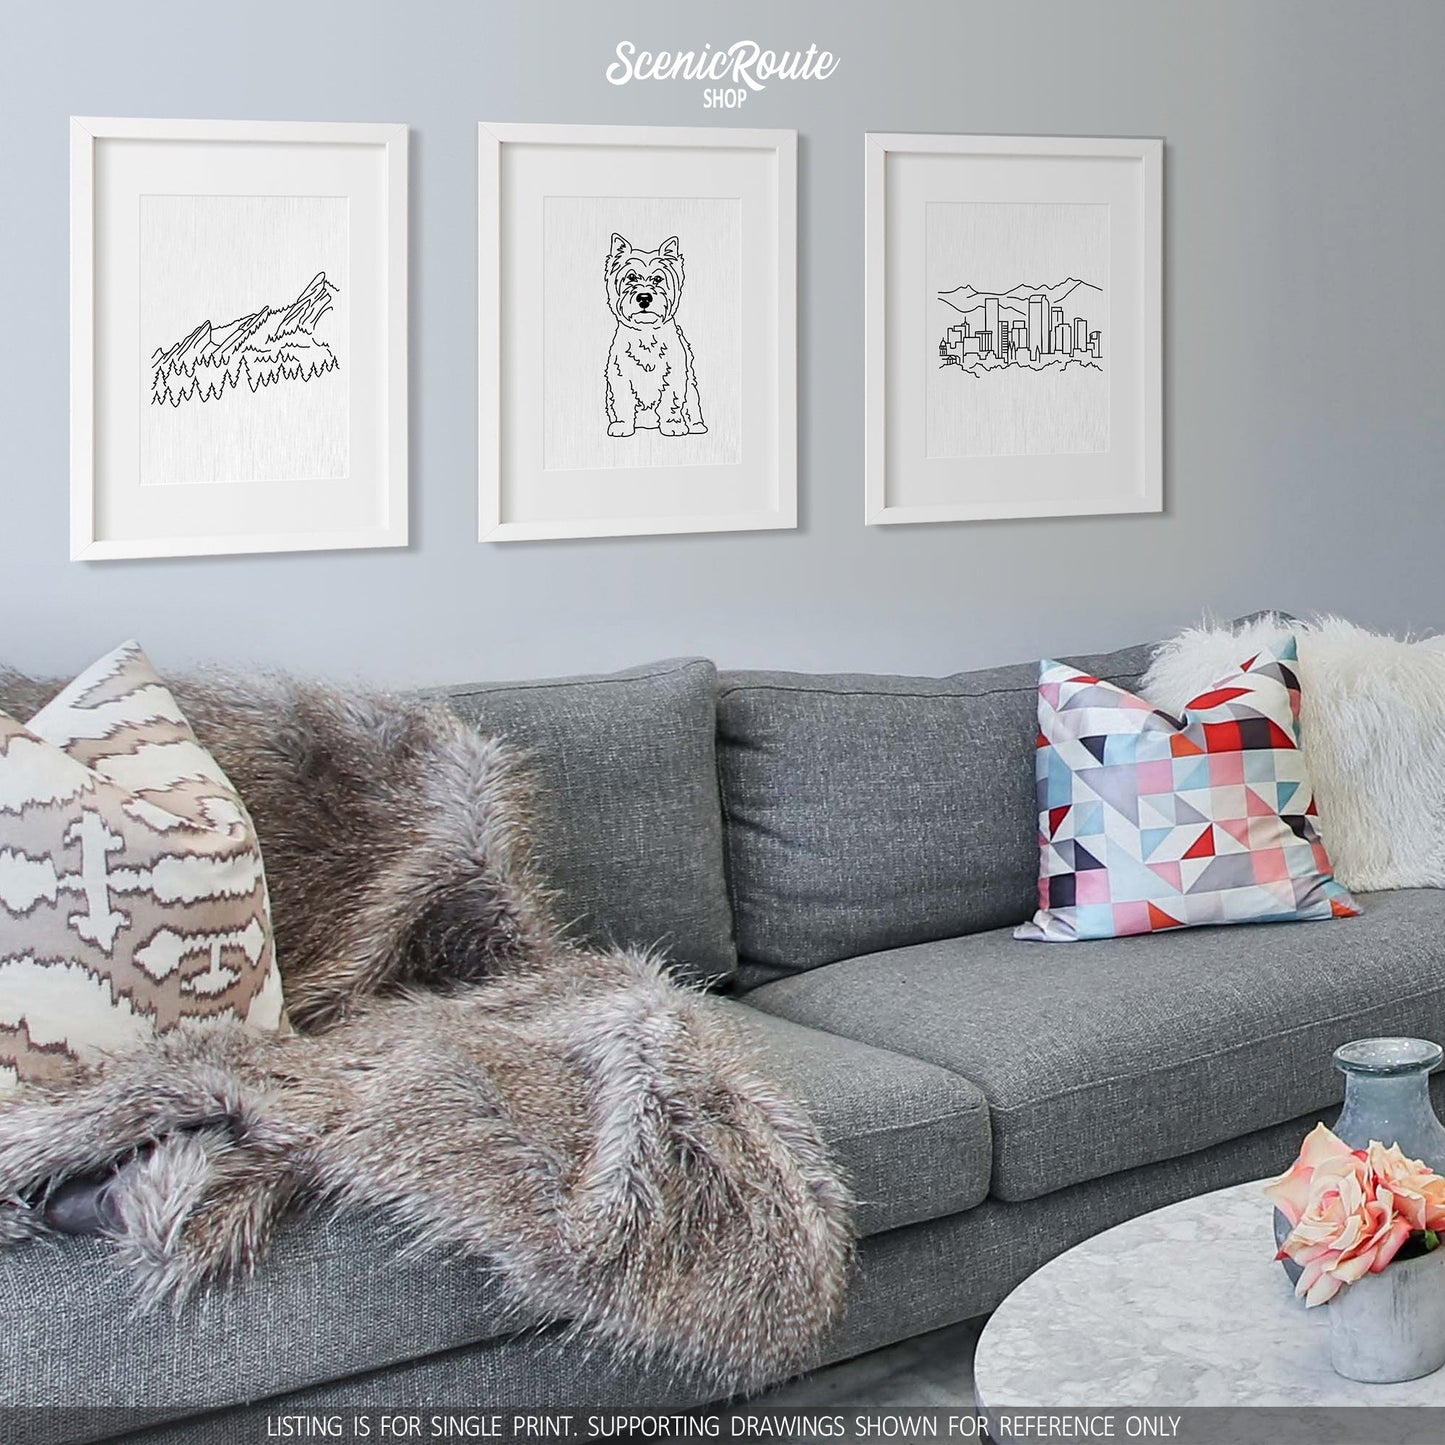 A group of three framed drawings on a white wall hanging above a couch with pillows and a blanket. The line art drawings include the Flatiron Mountains, a West Highland Terrier dog, and the Denver Skyline